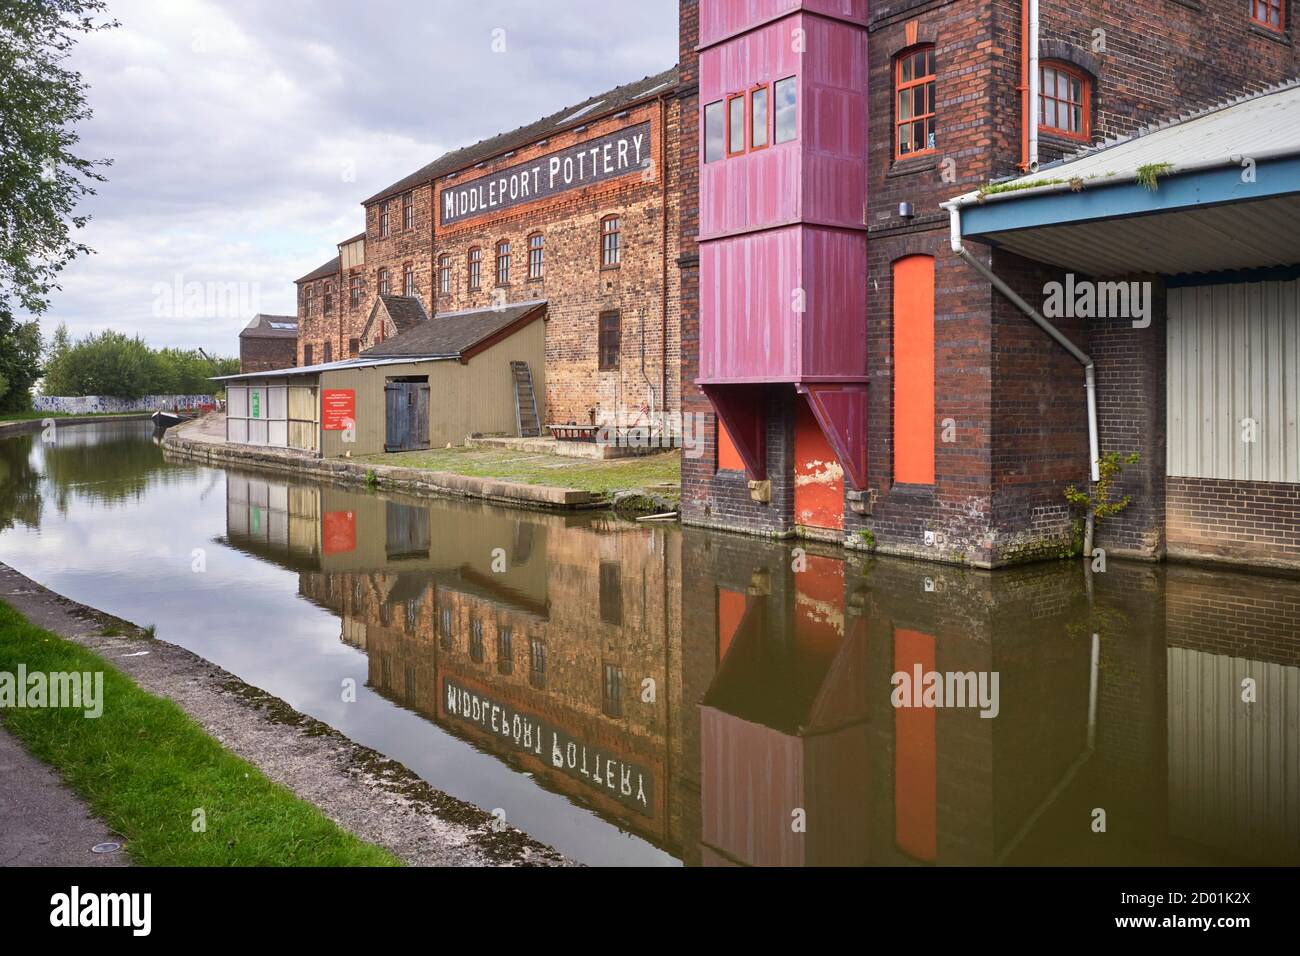 Middleport pottery on the bank of the Trent and Mersey canal at Stoke on Trent Stock Photo